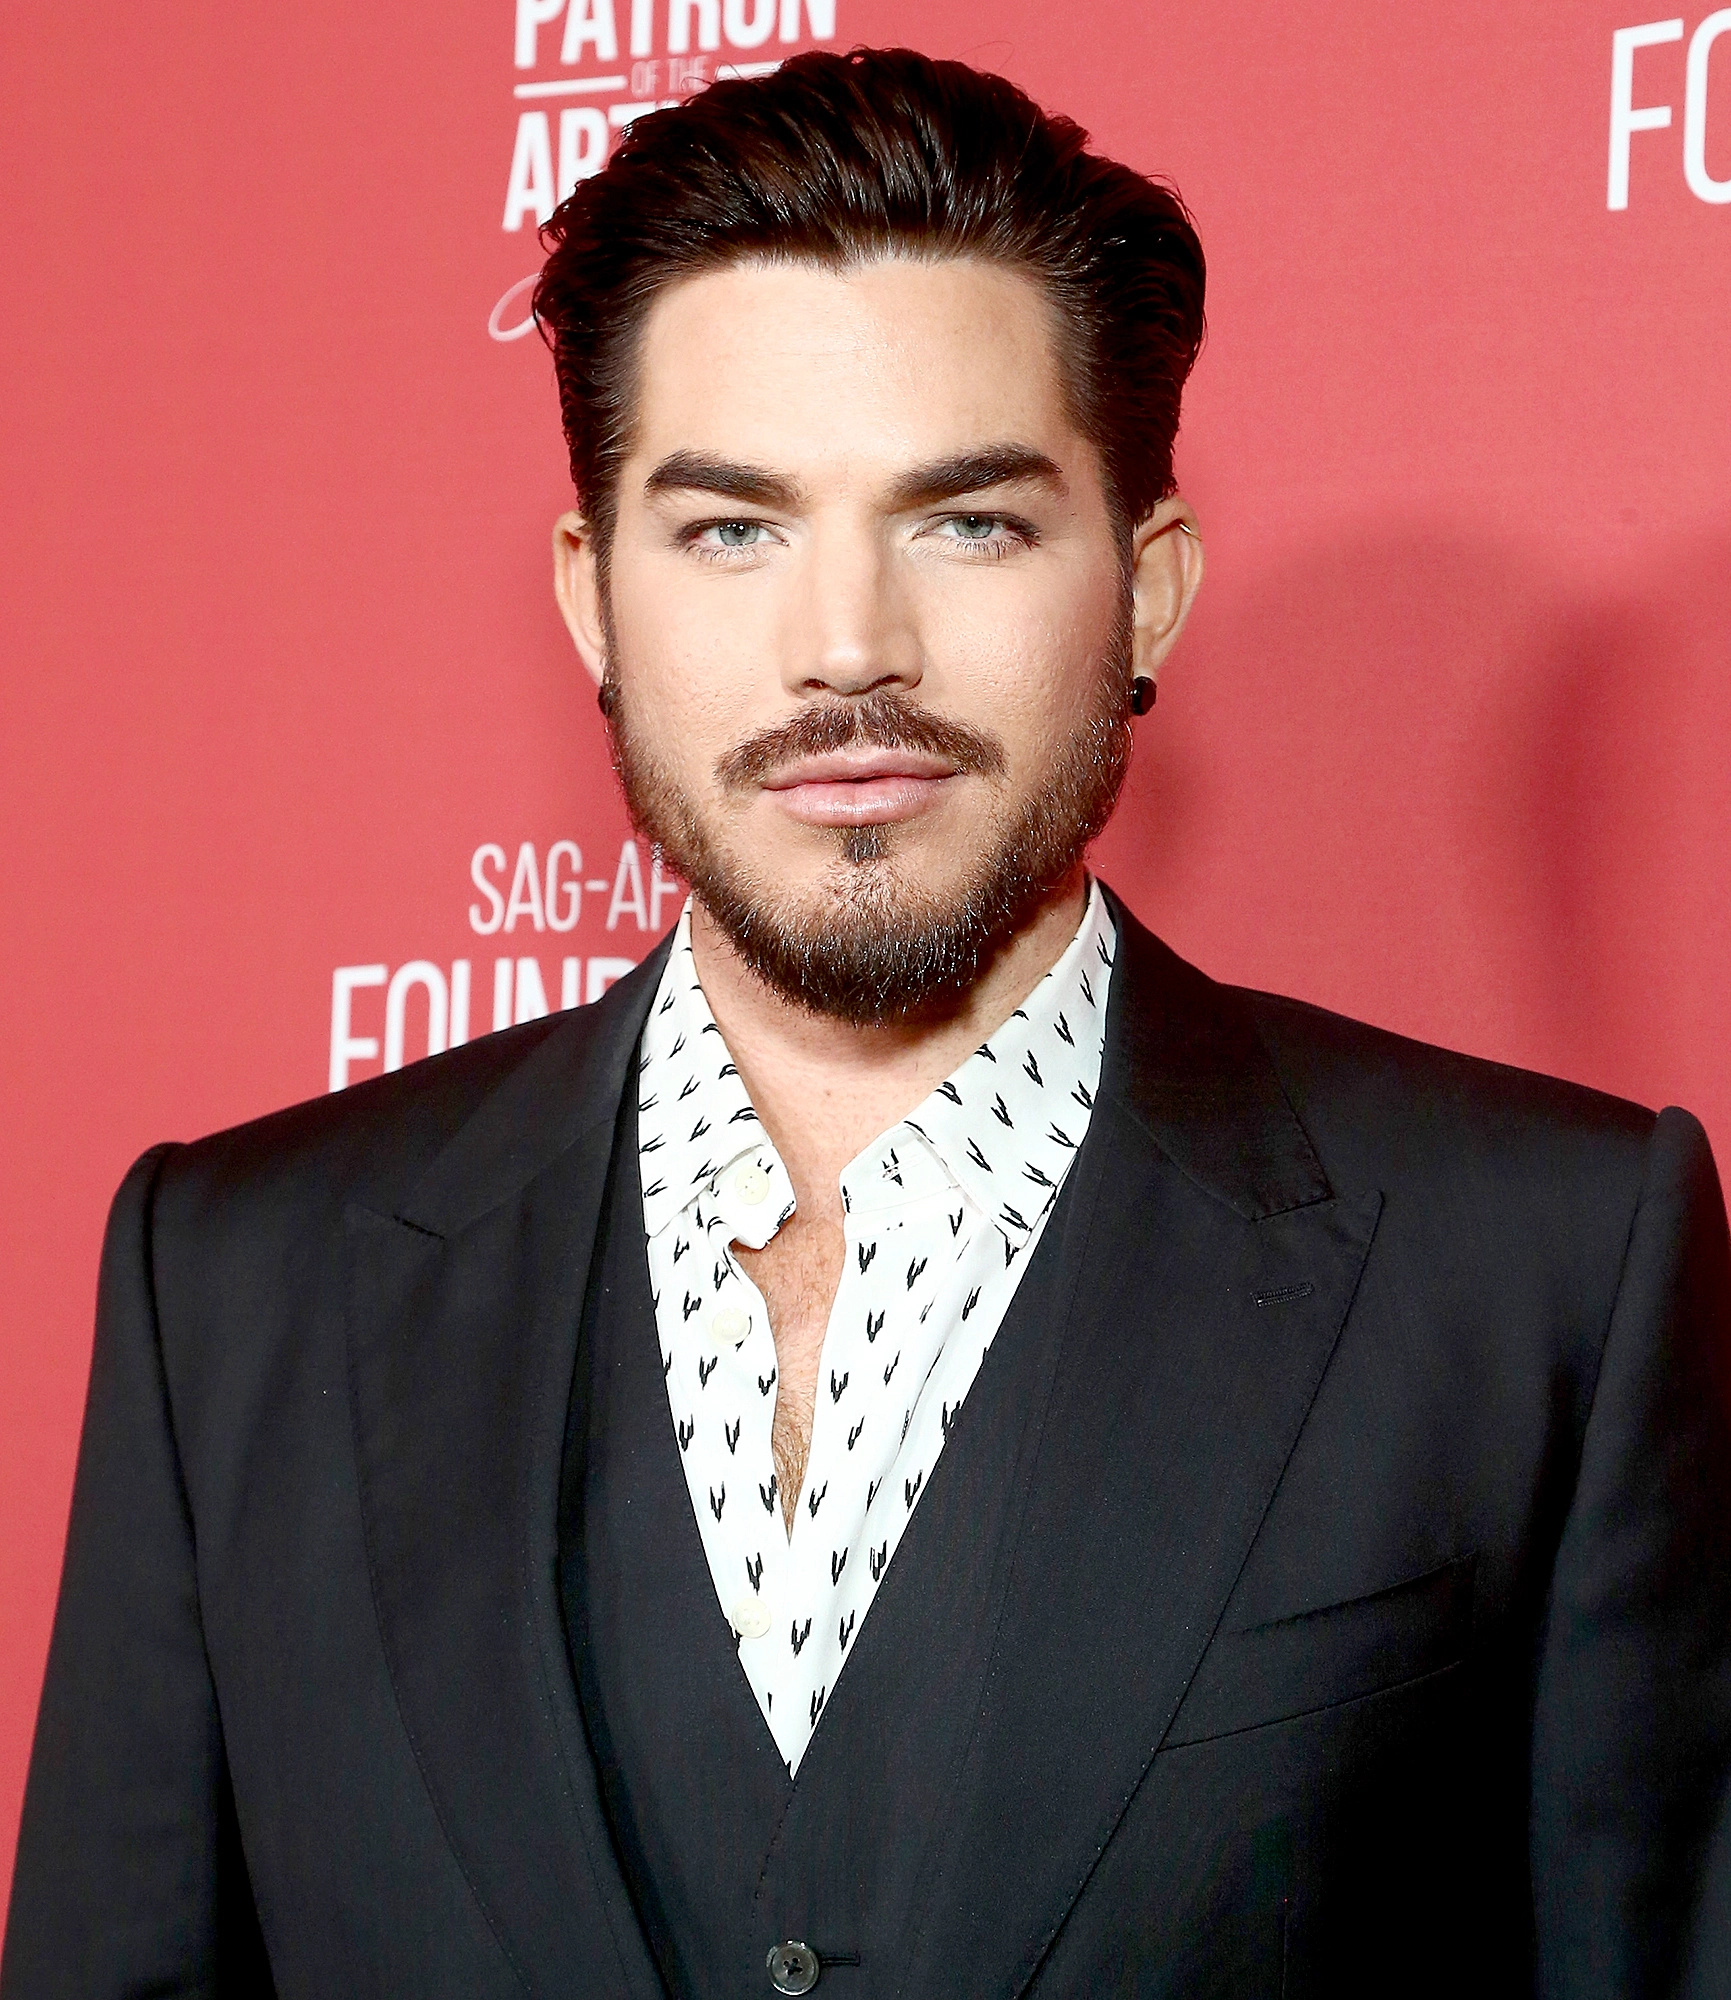 Adam Lambert: The 2010 Dorian Awards nominee for TV Musical or Comedy Performance of the Year. 1740x2000 HD Wallpaper.